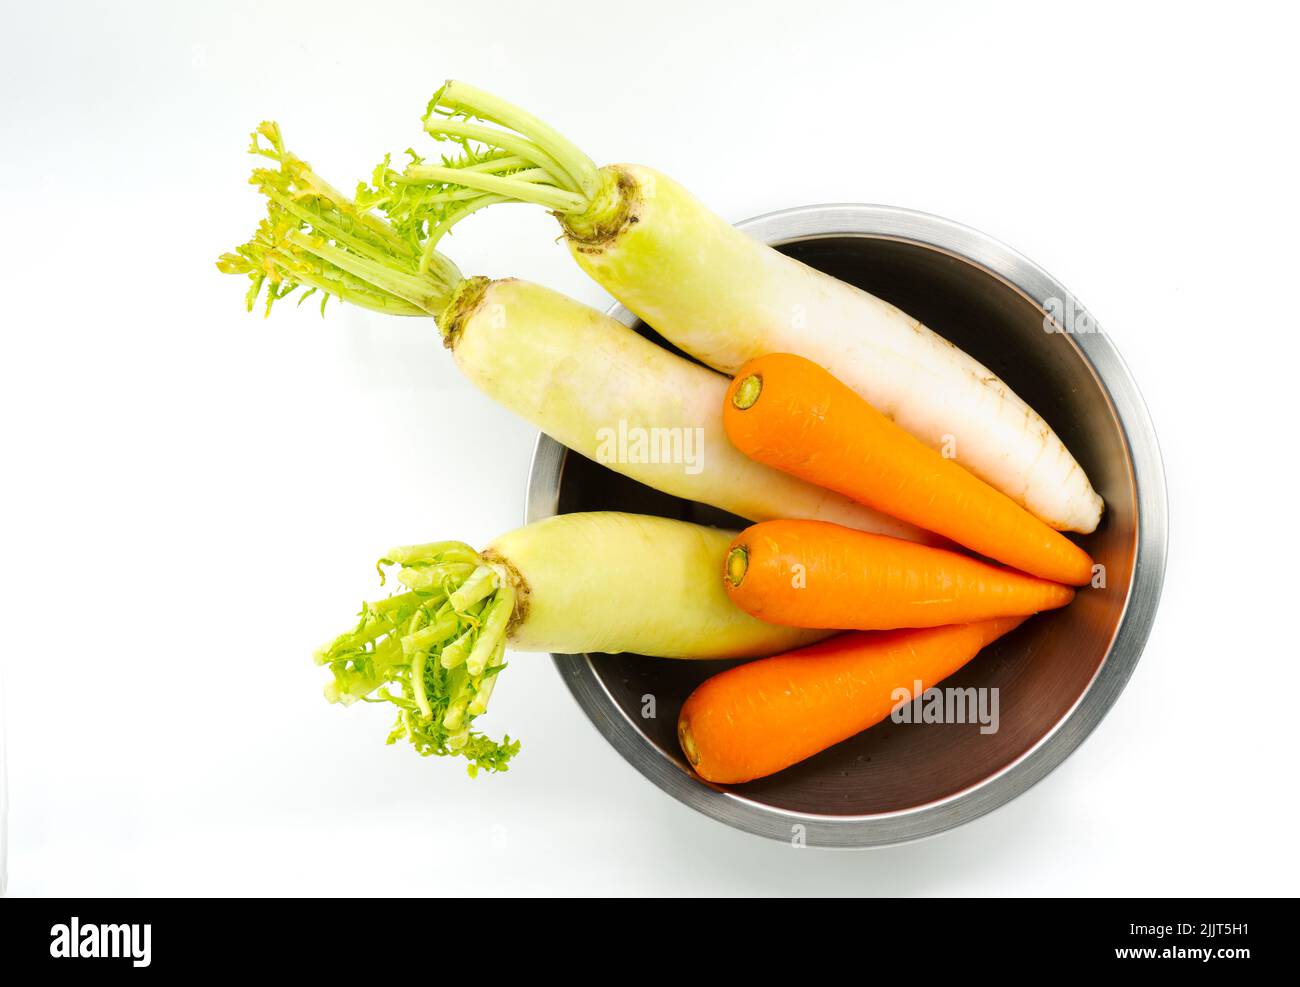 Organic carrots and white radishes in round shape stainless steel bowl, unpeeled carrots and radishes, top view image, isolated image on white backgro Stock Photo